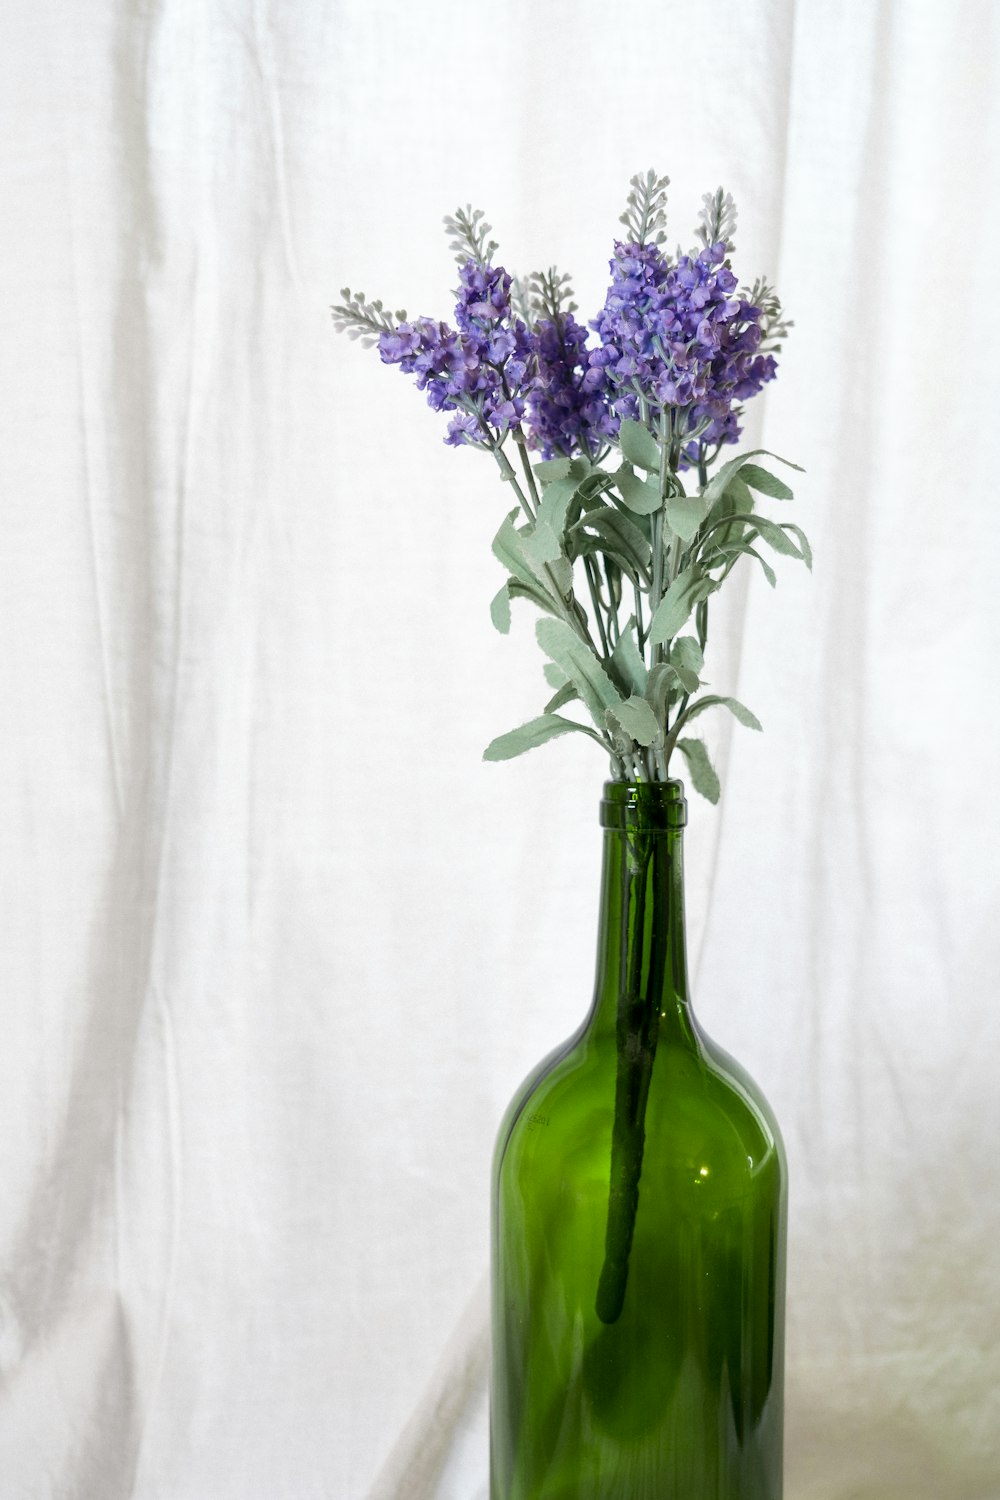 a green glass vase with purple flowers in it